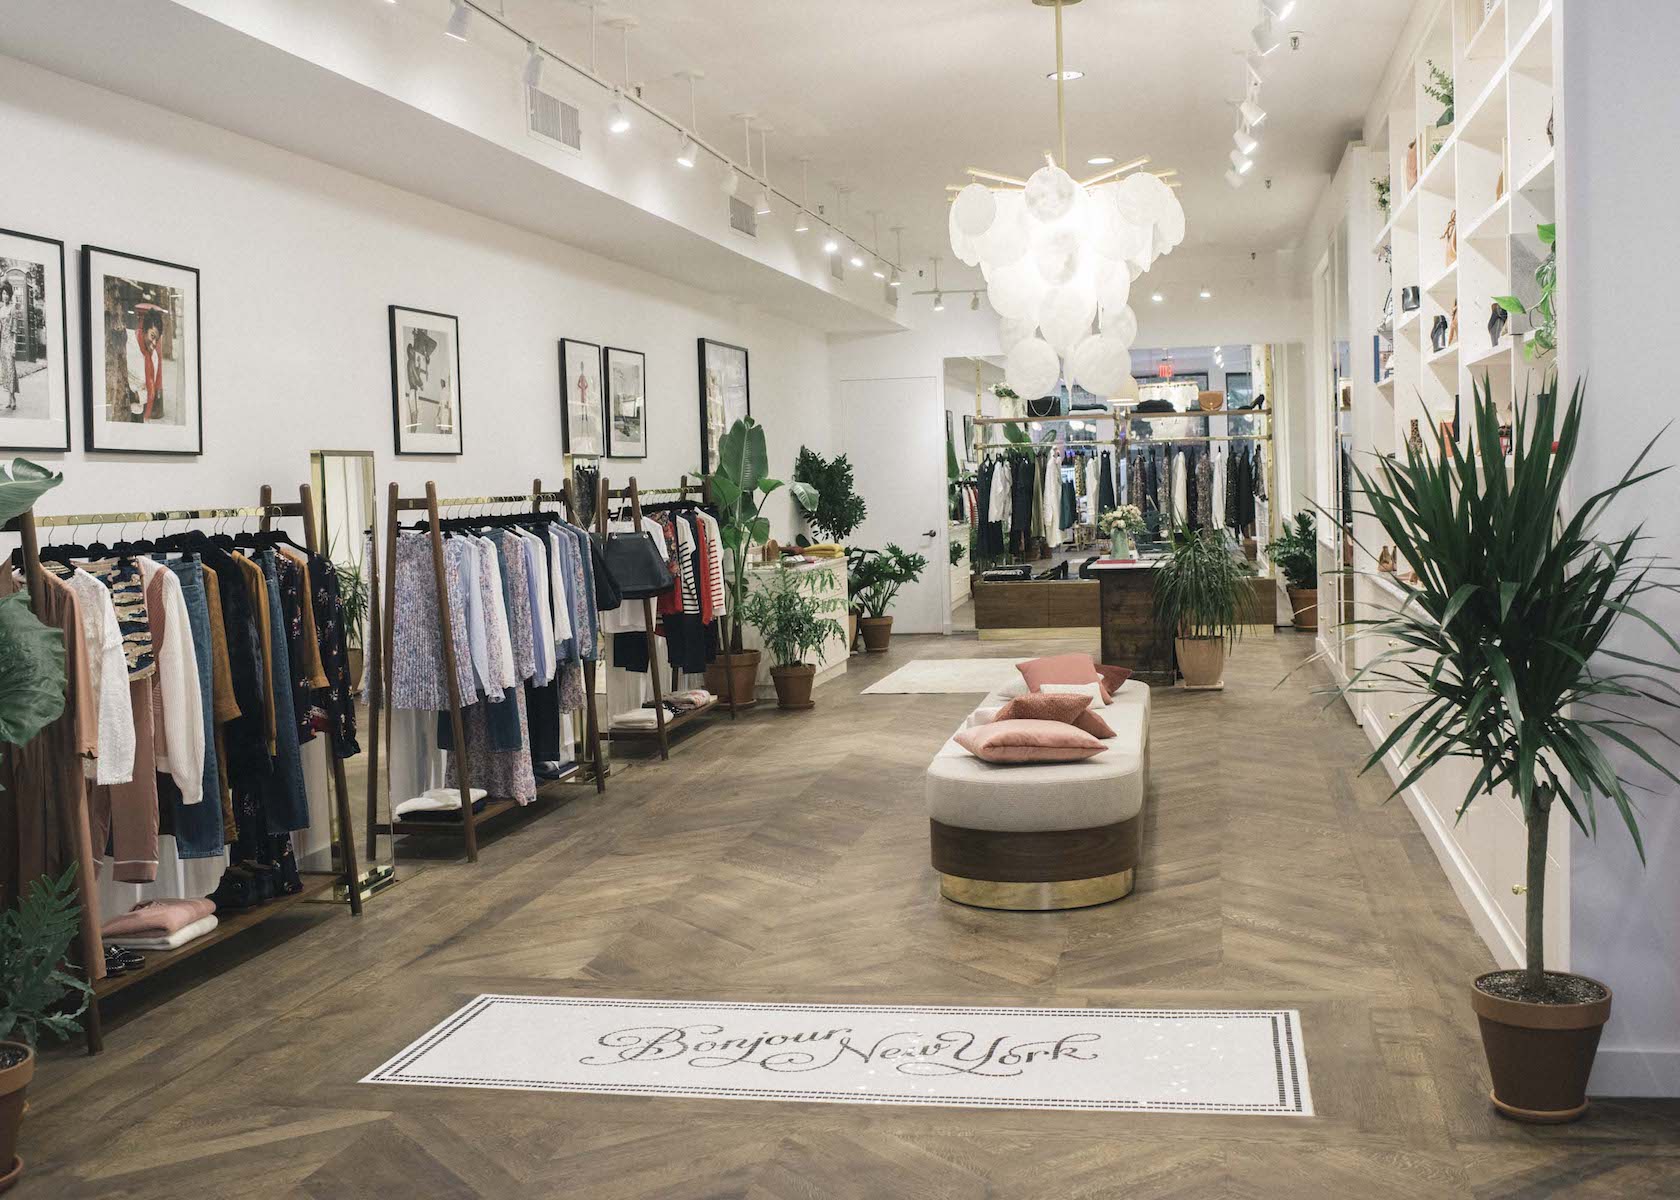 French Brand Sezane’s First US Flagship Store In Nolita1680 x 1200